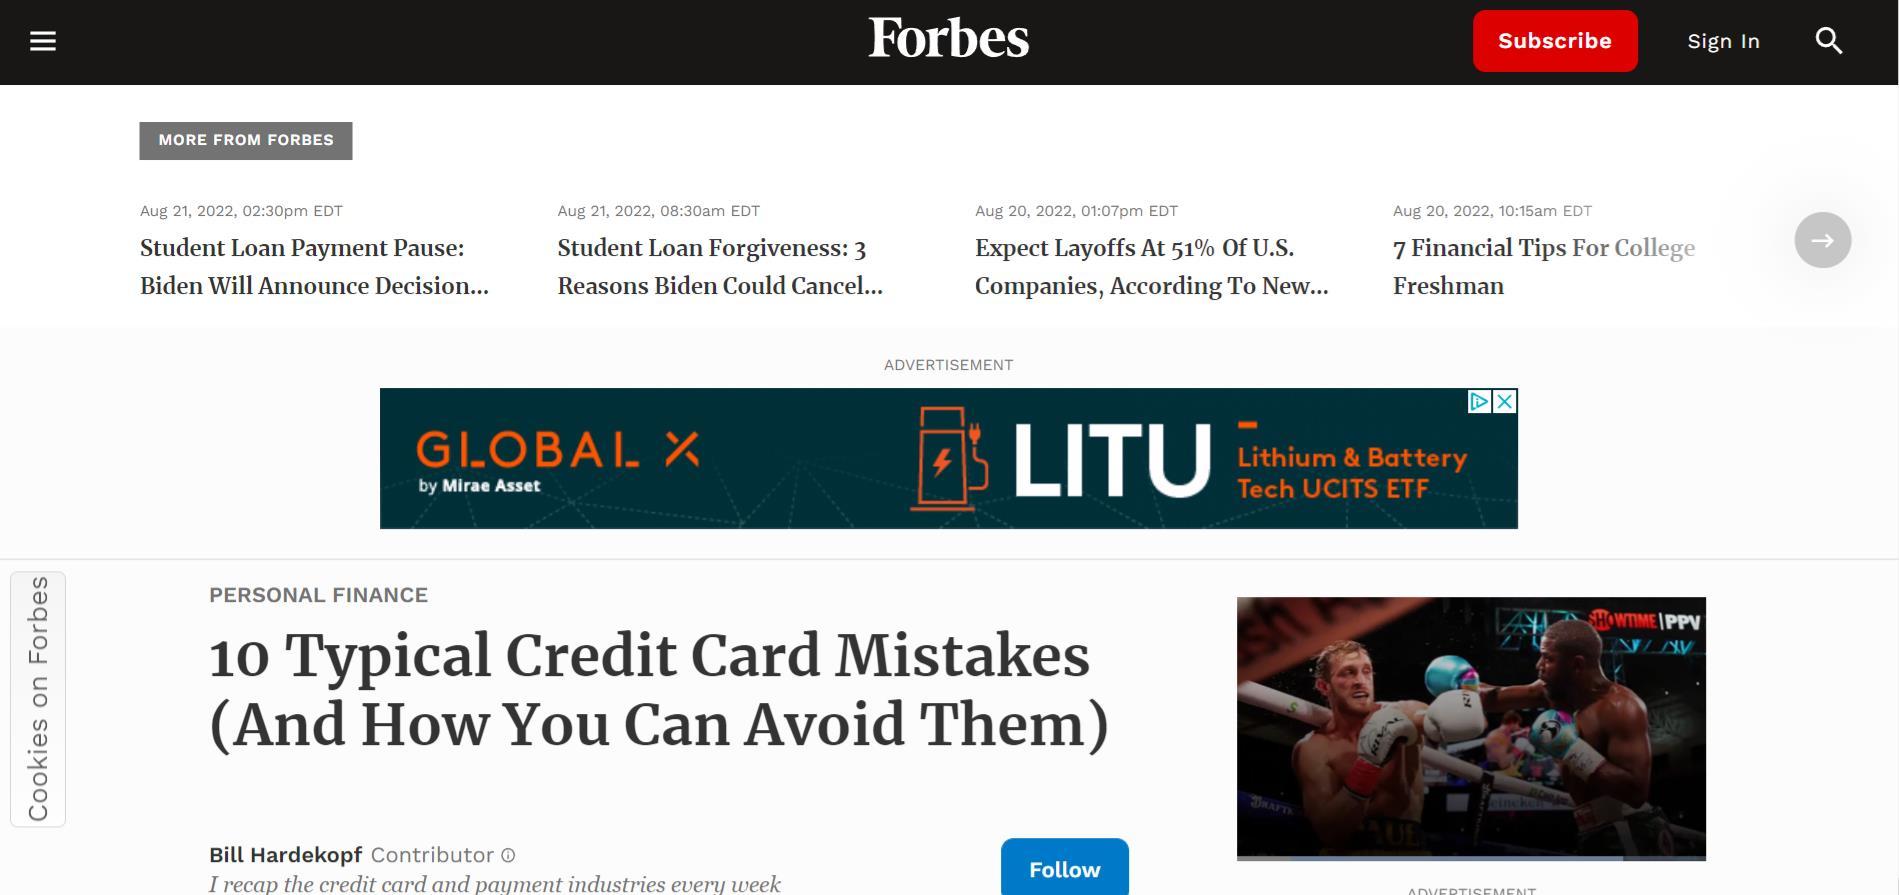 A screenshot of the Forbes homepage showing the Surfshark CleanWeb ad blocker feature turned off. You can see a banner ad right at the top of the screen.